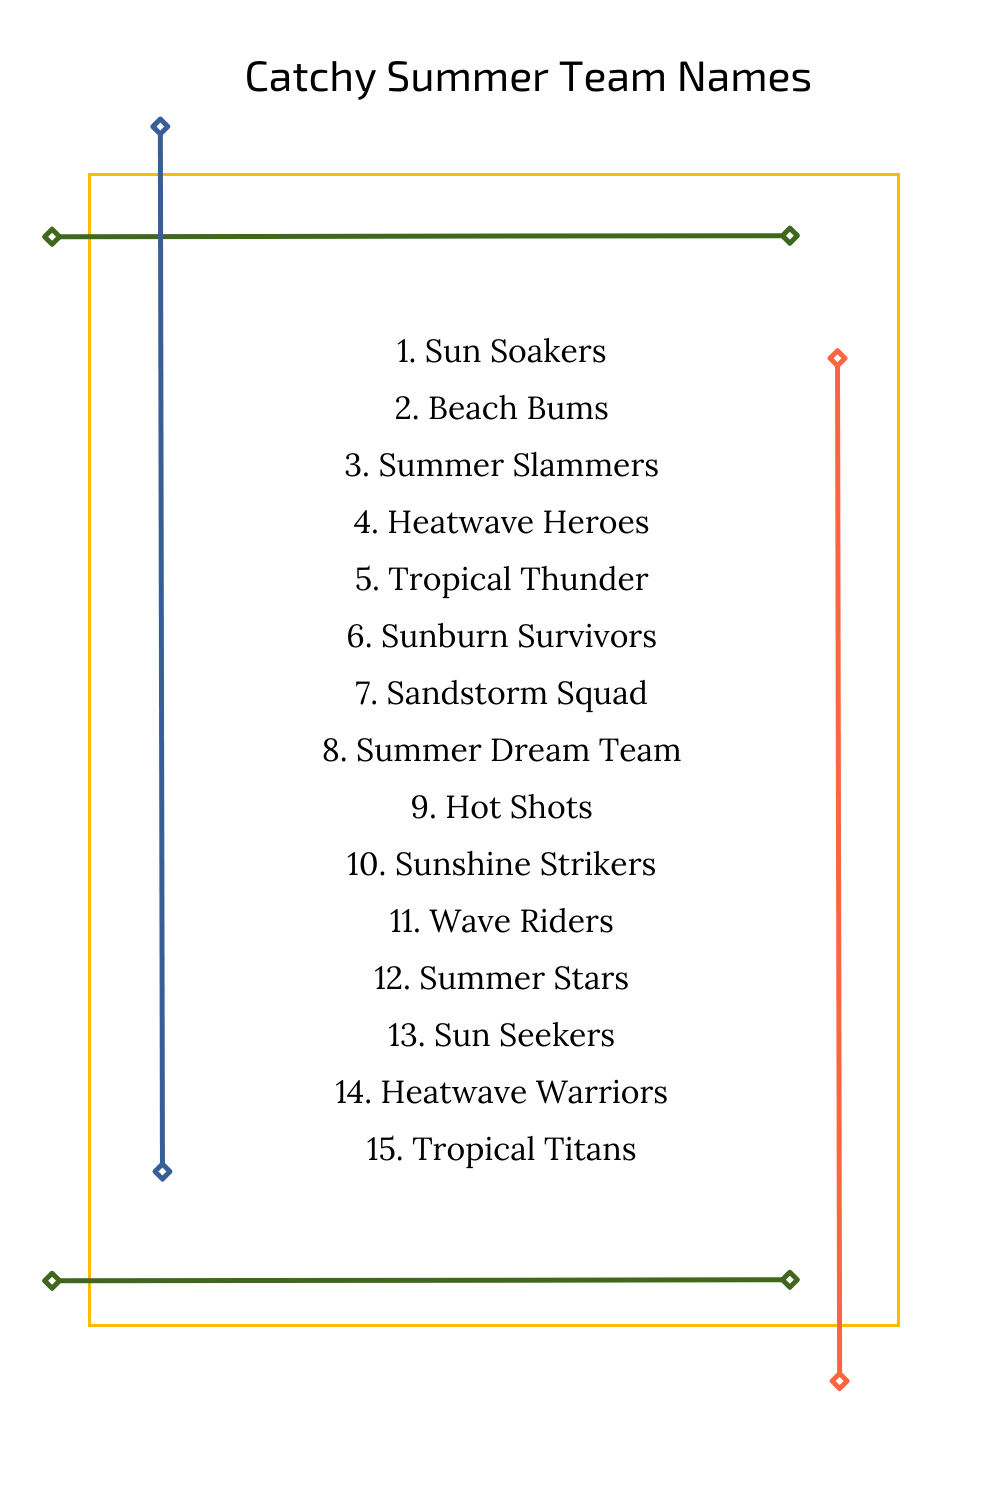 Catchy Summer Team Names